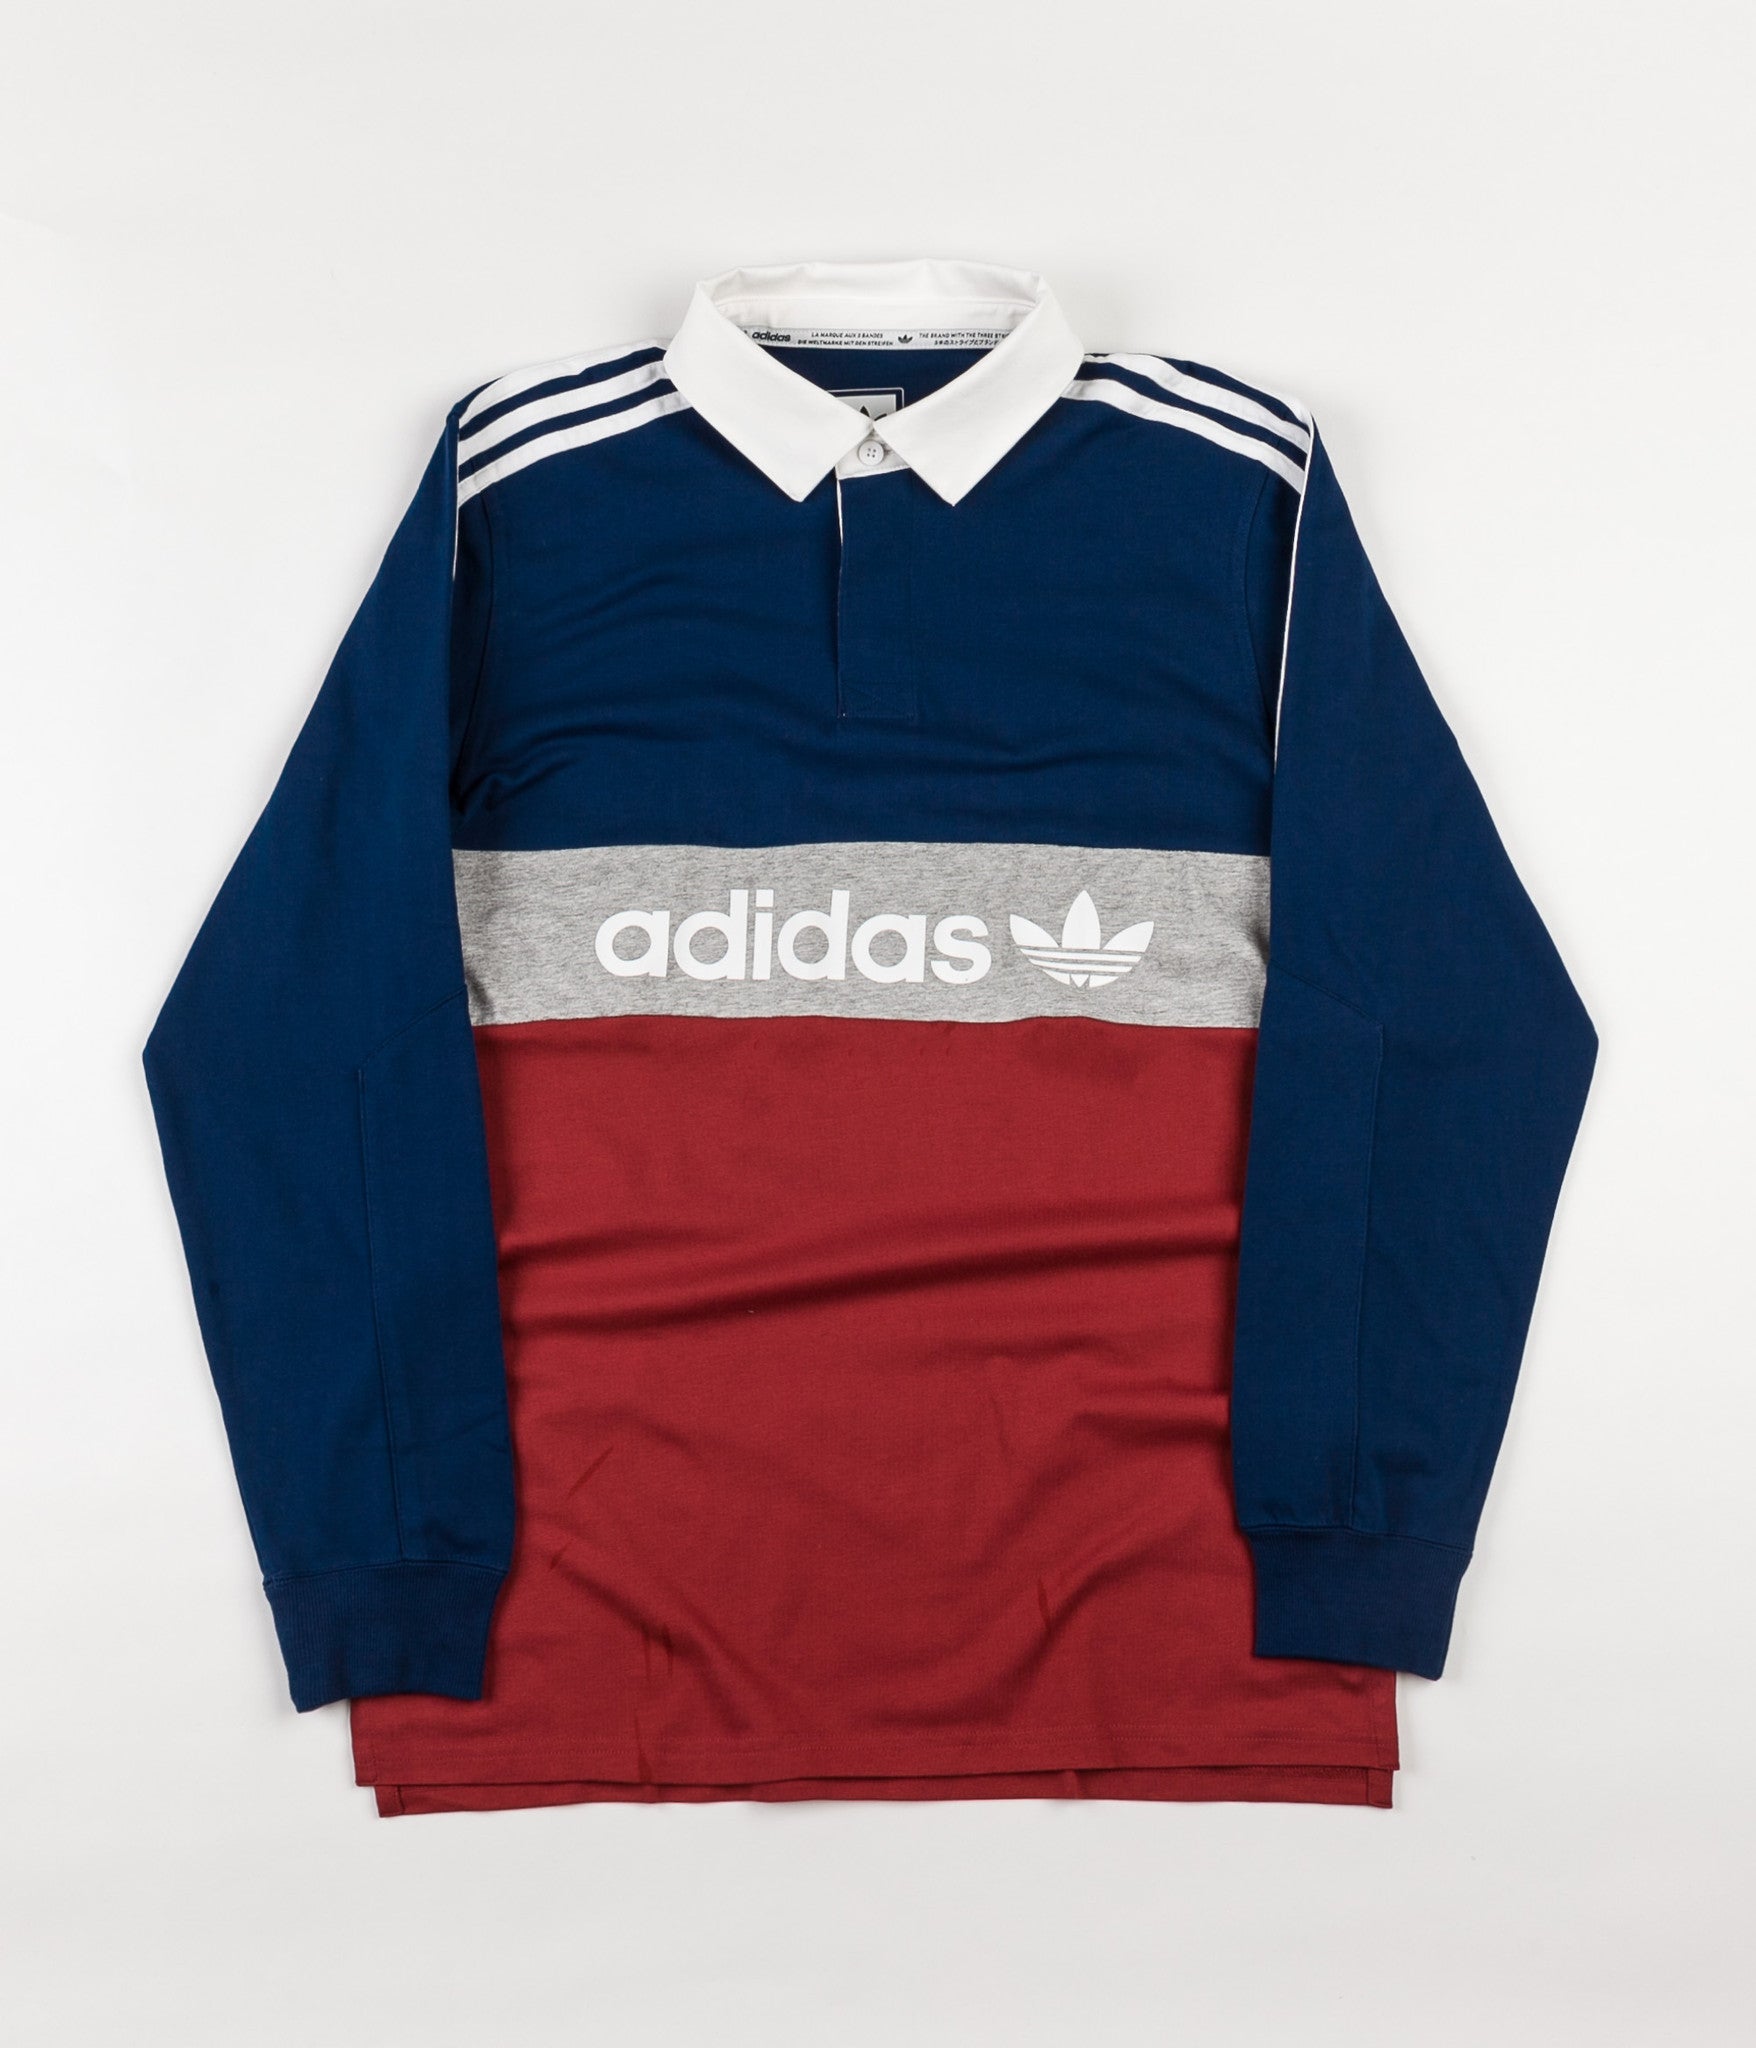 adidas red white and blue shirt